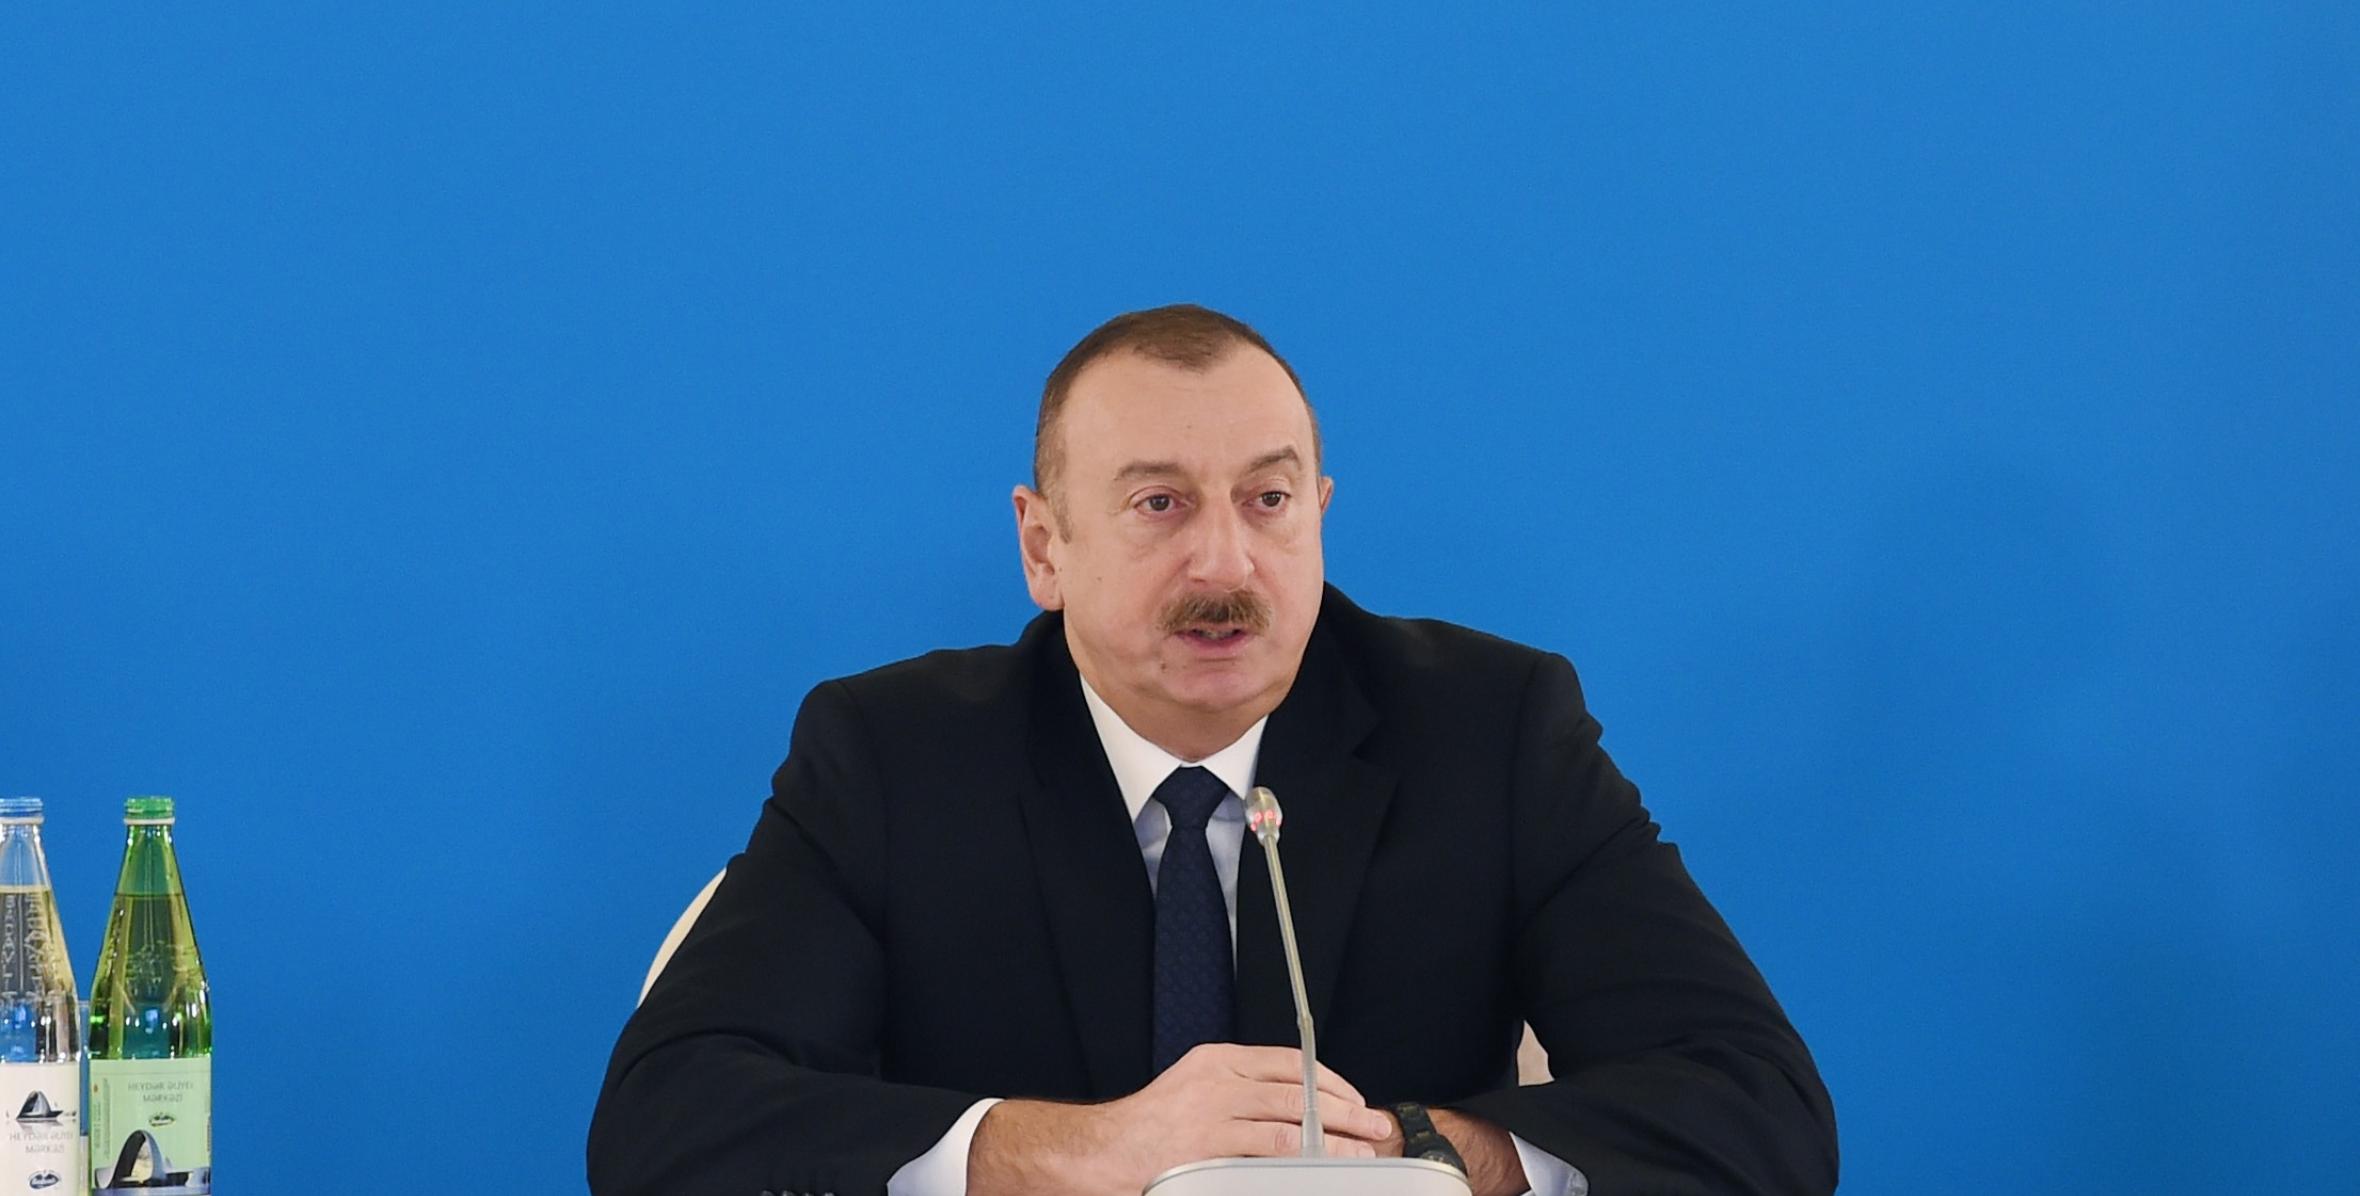 Speech by Ilham Aliyev at the fourth  Ministerial Meeting of Southern Gas Corridor Advisory Council kicked off in Baku